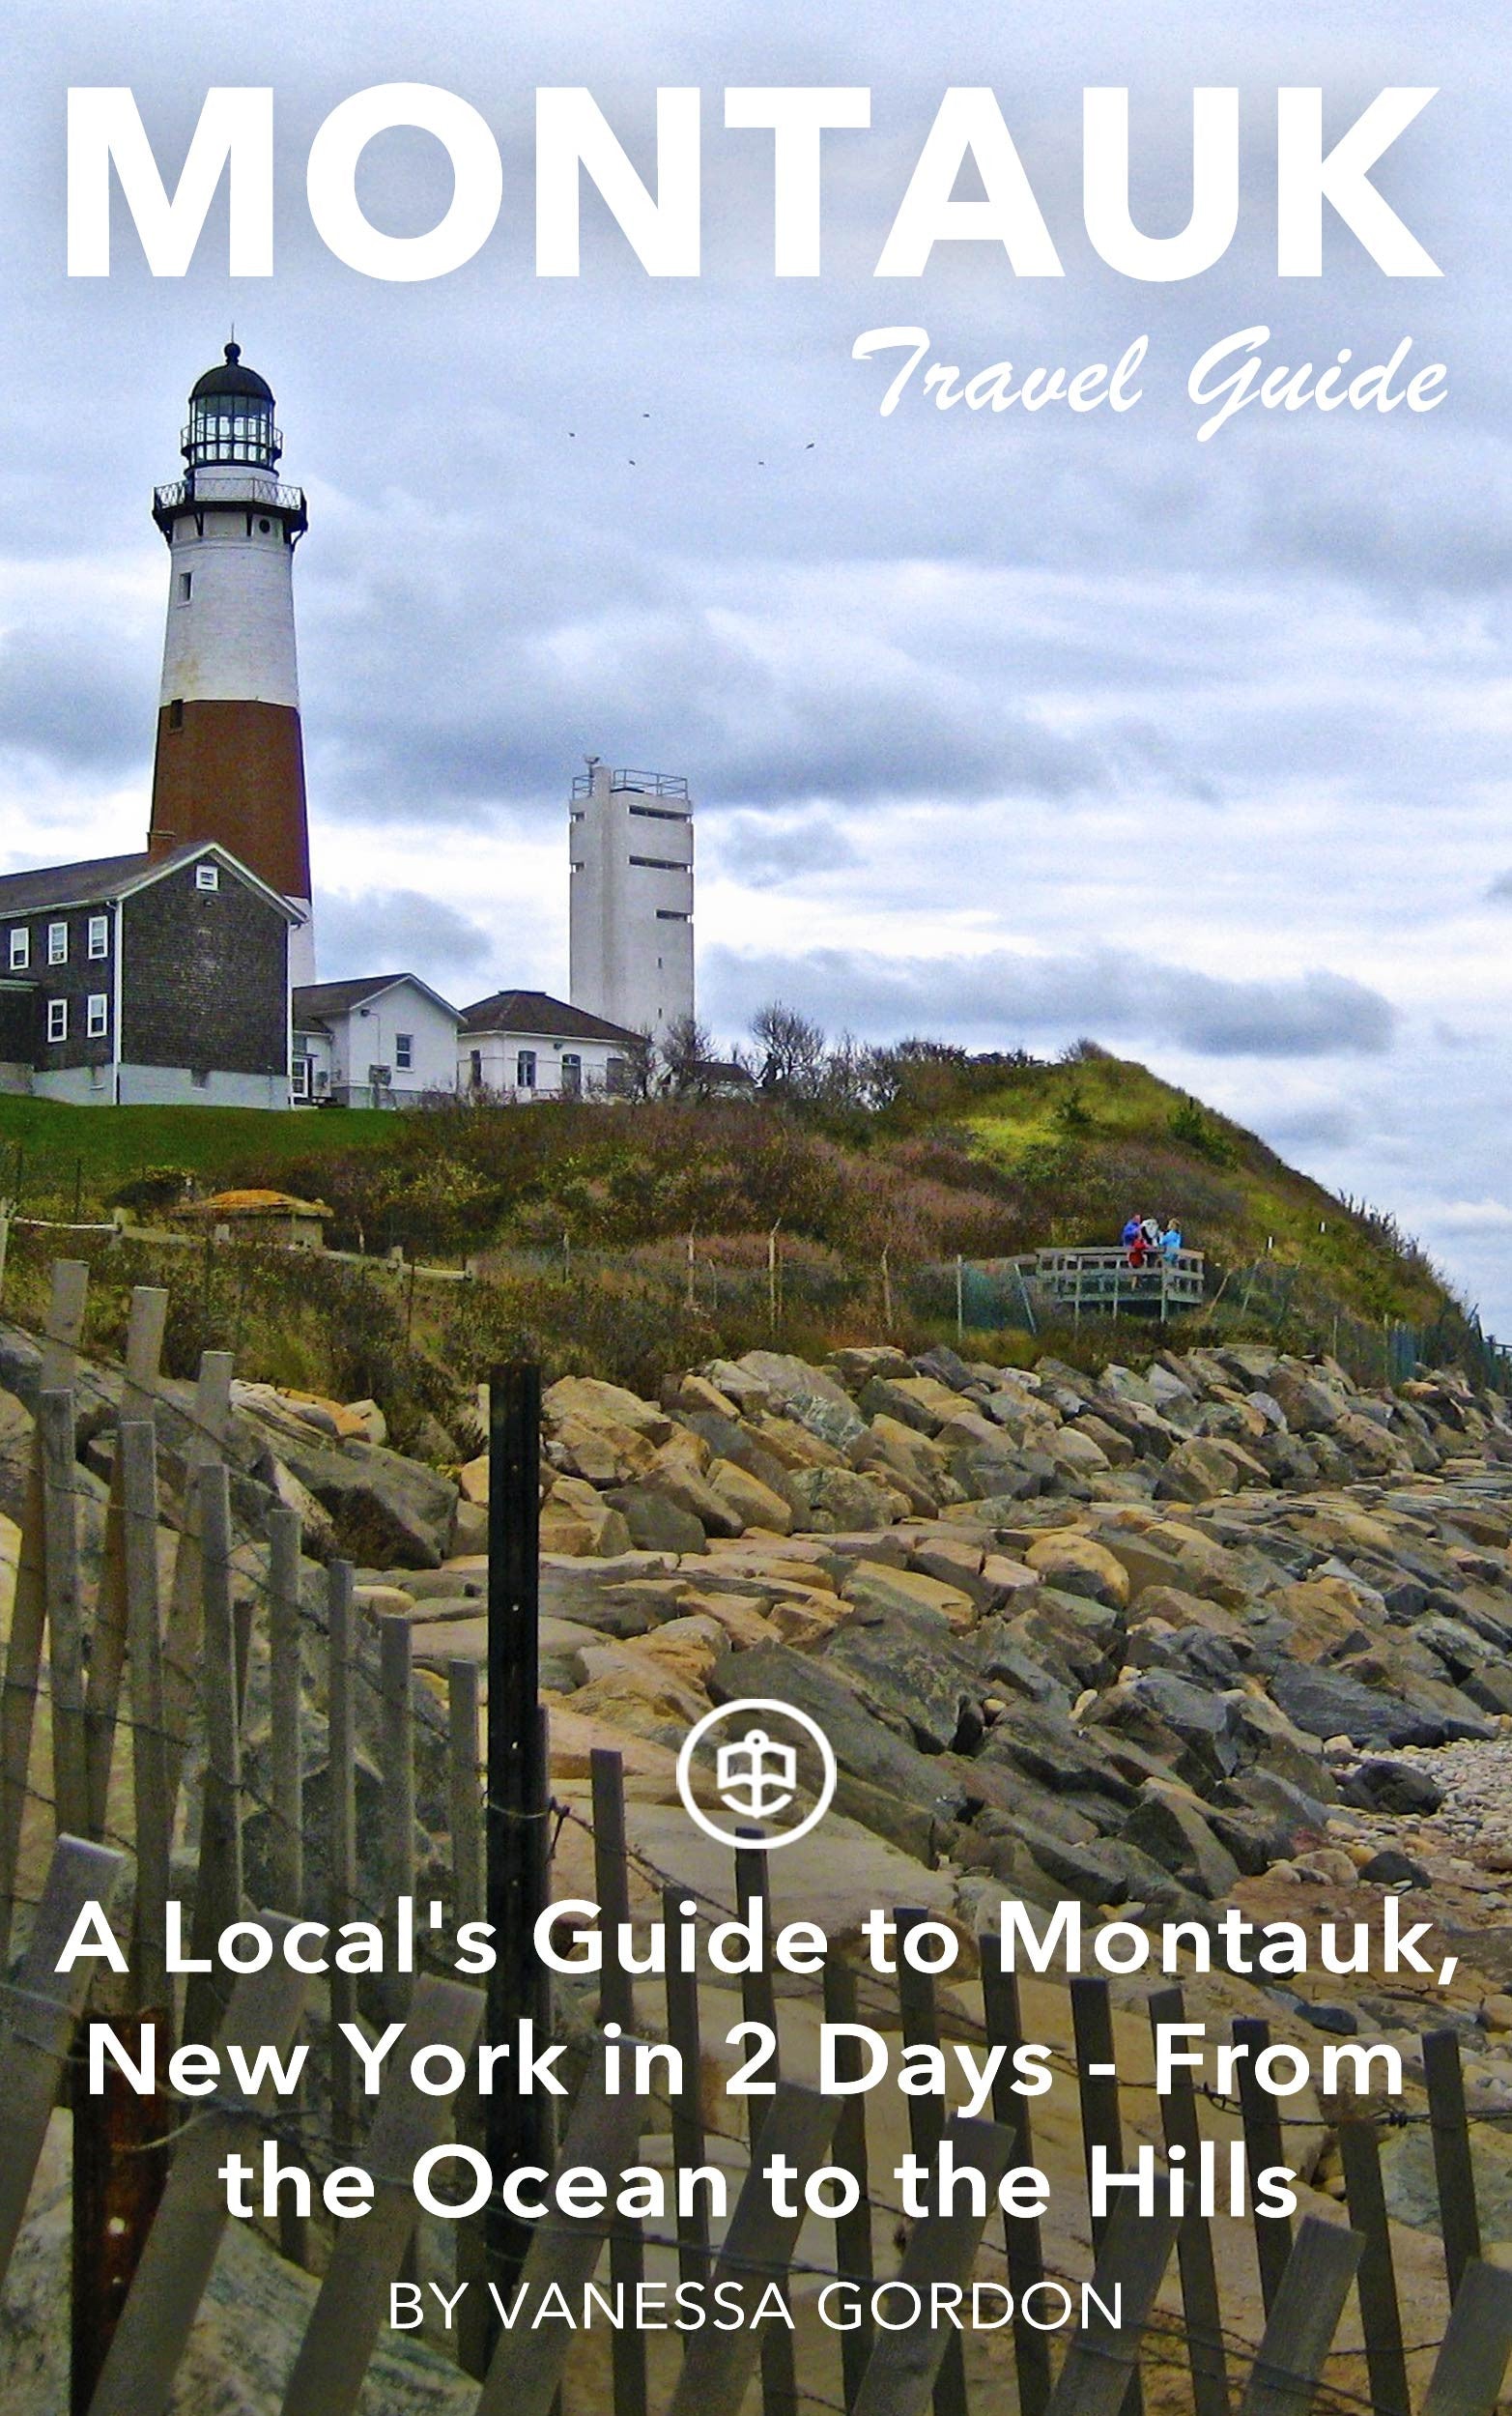 A Local's Guide to Montauk, New York in 2 Days - From the Ocean to the Hills